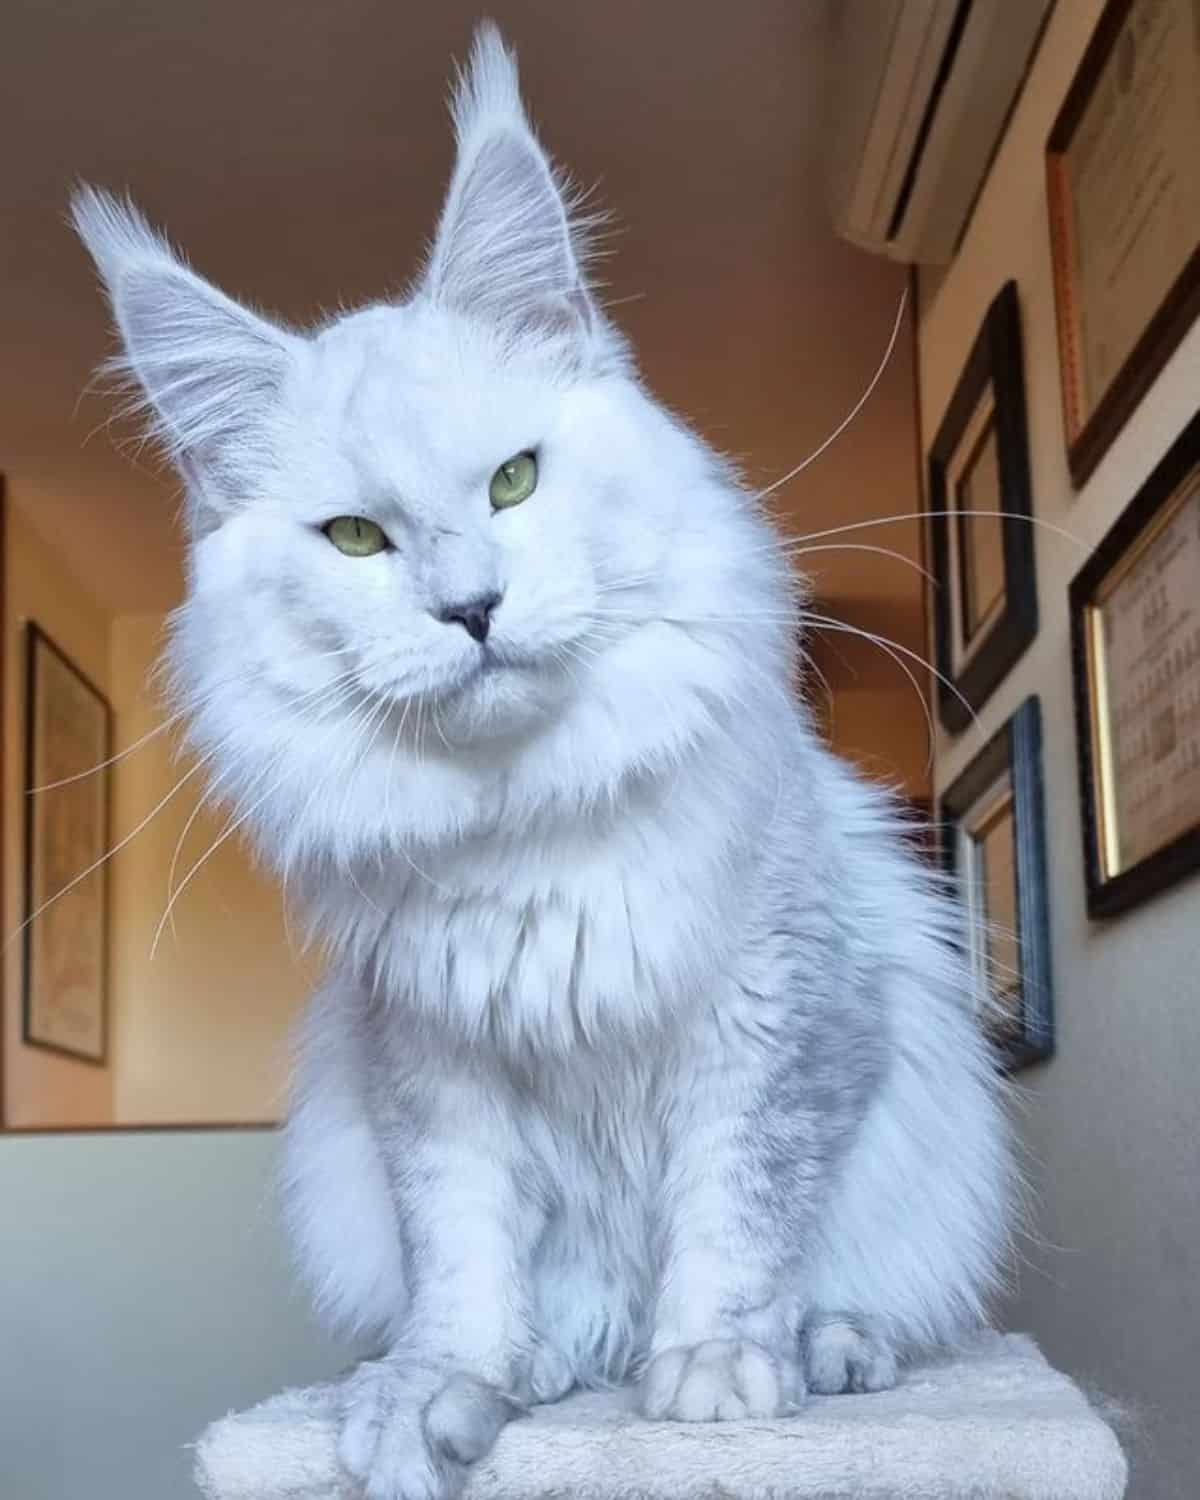 A beautiful white maine coon sitting on a cat tree.